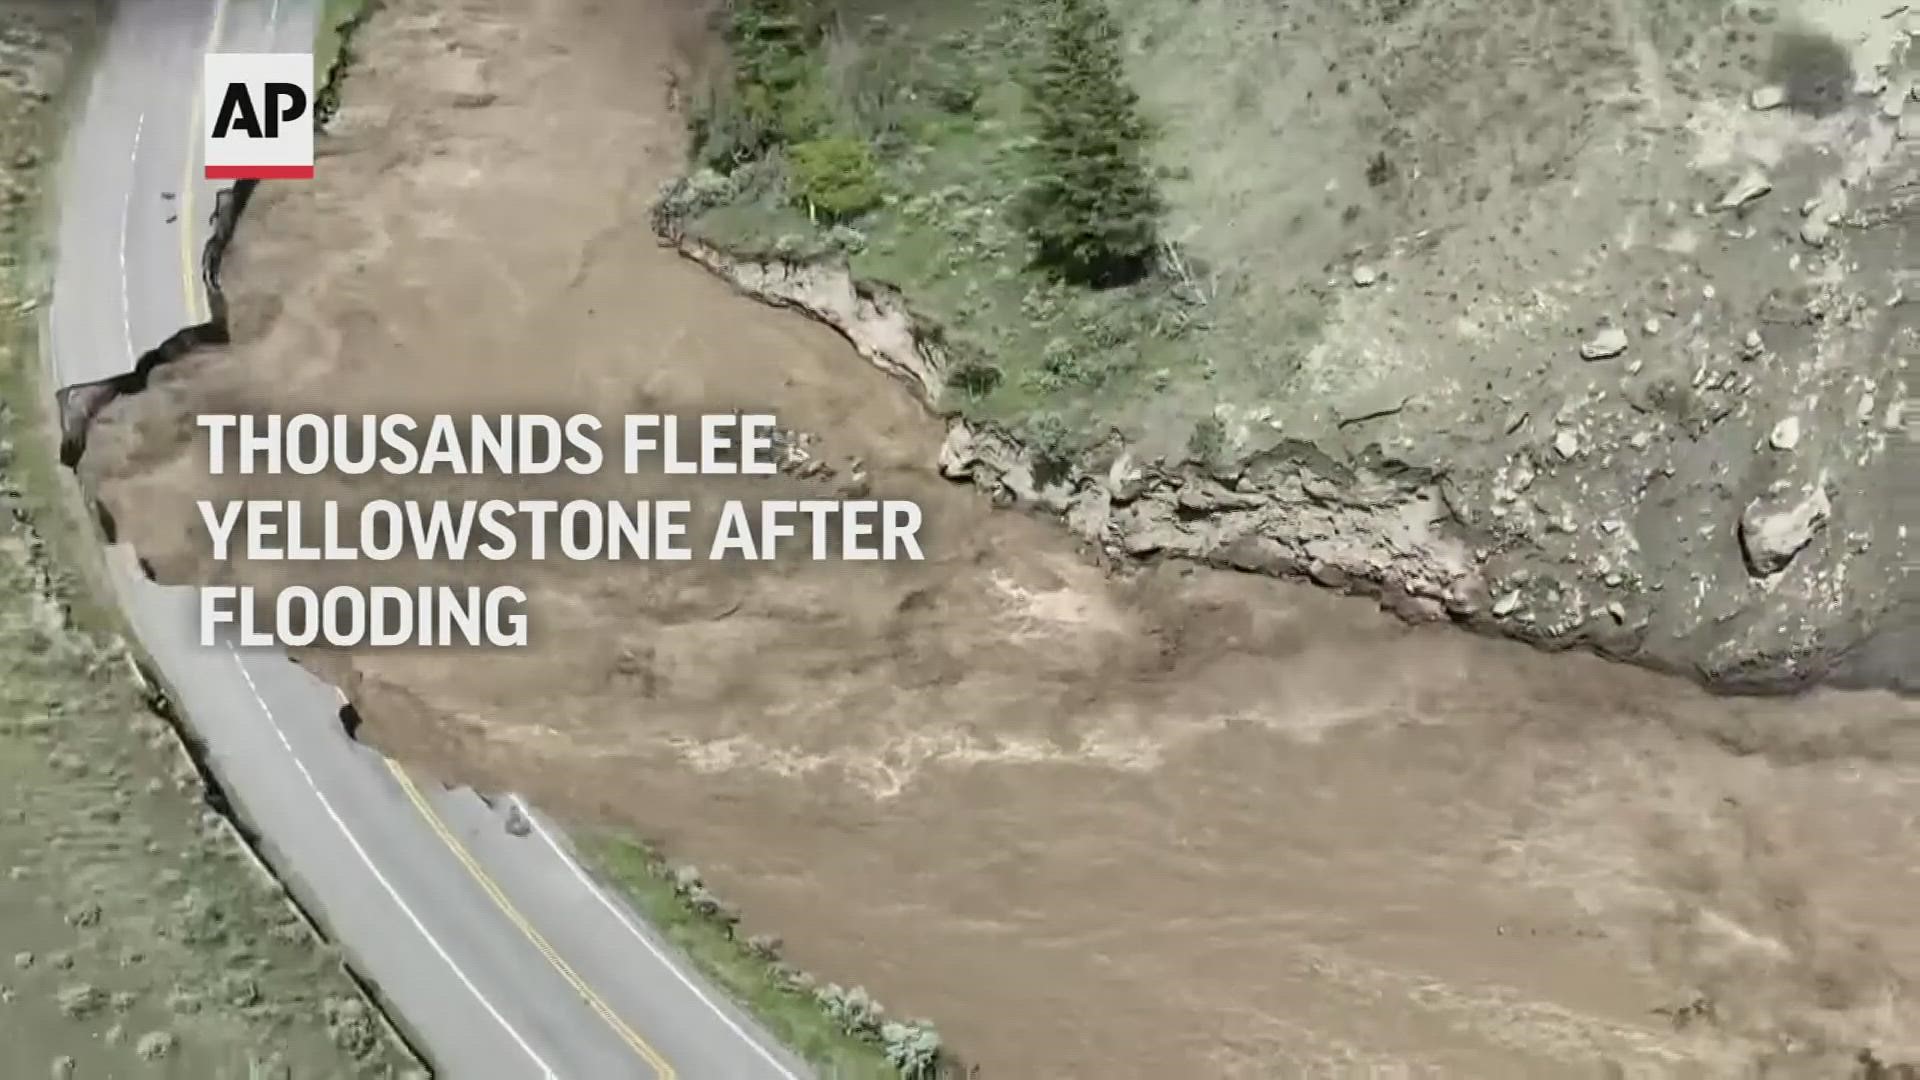 Yellowstone National Park officials say over 10,000 visitors had evacuated the park by Tuesday as it evaluates damage from massive flooding.